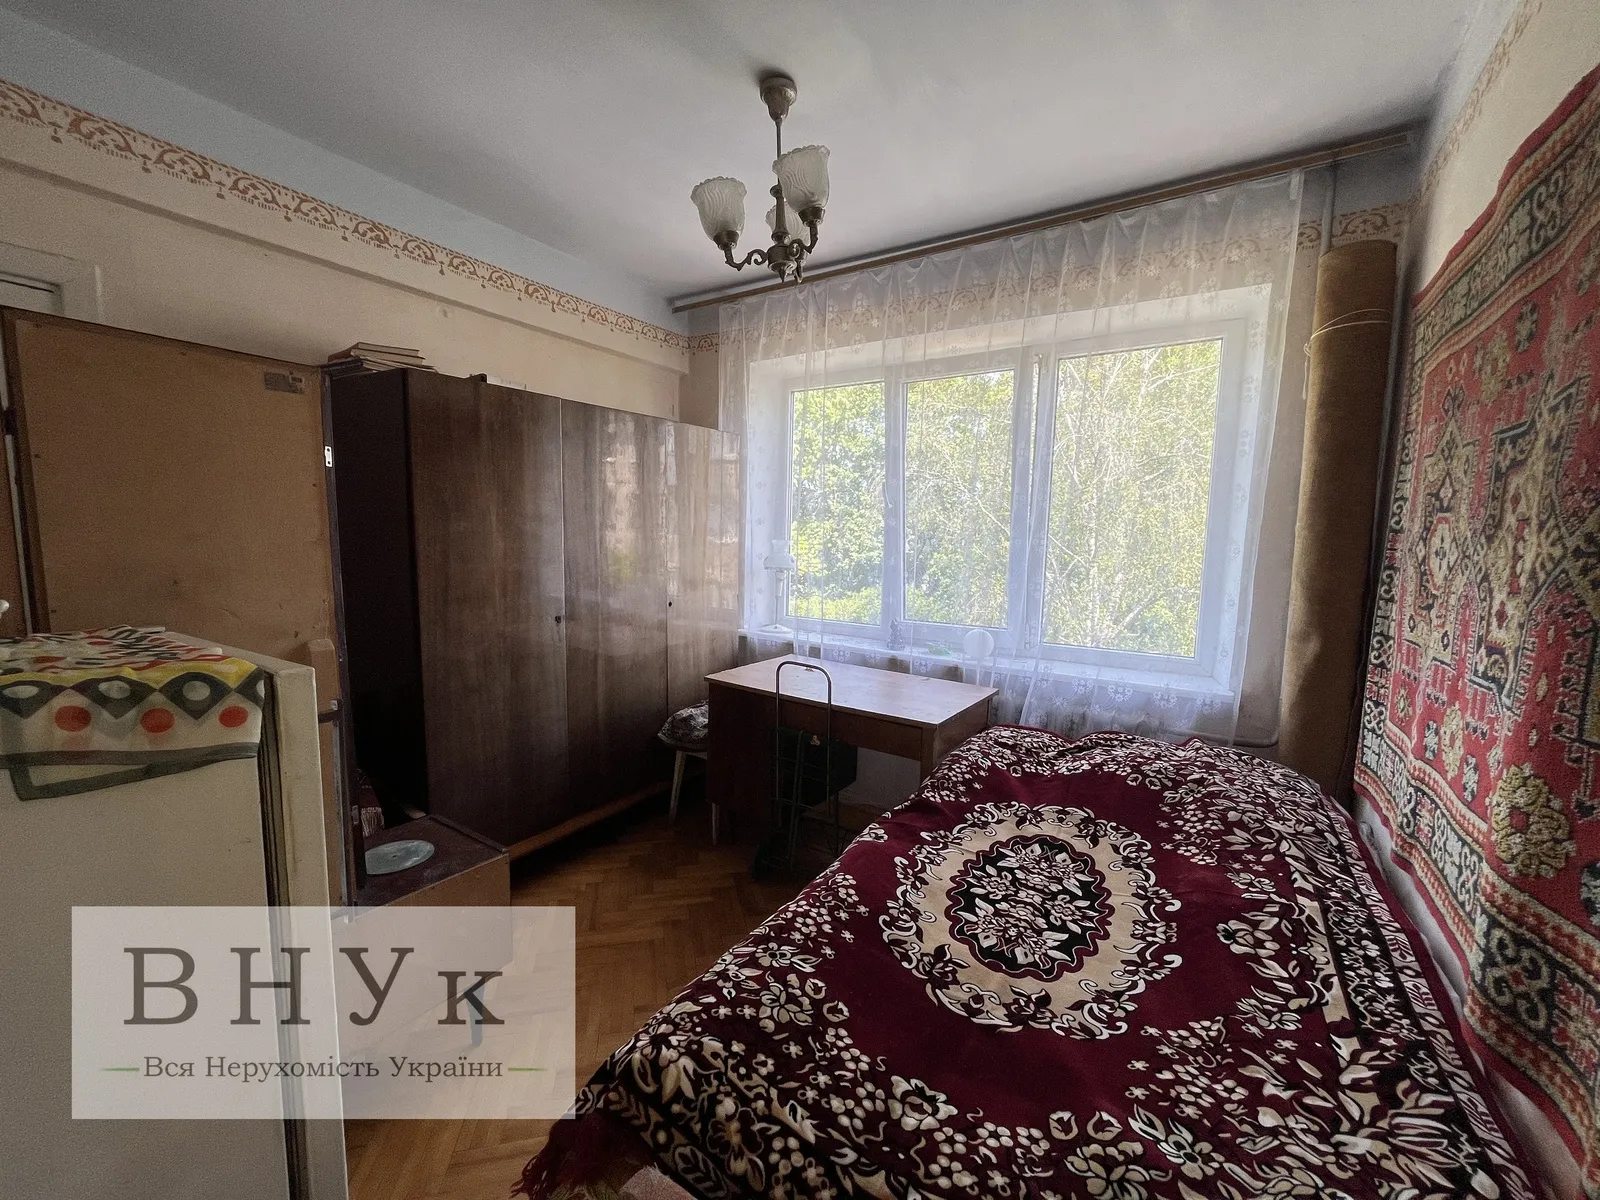 Apartments for sale. 3 rooms, 504 m², 4th floor/5 floors. Lesi Ukrayinky vul., Ternopil. 